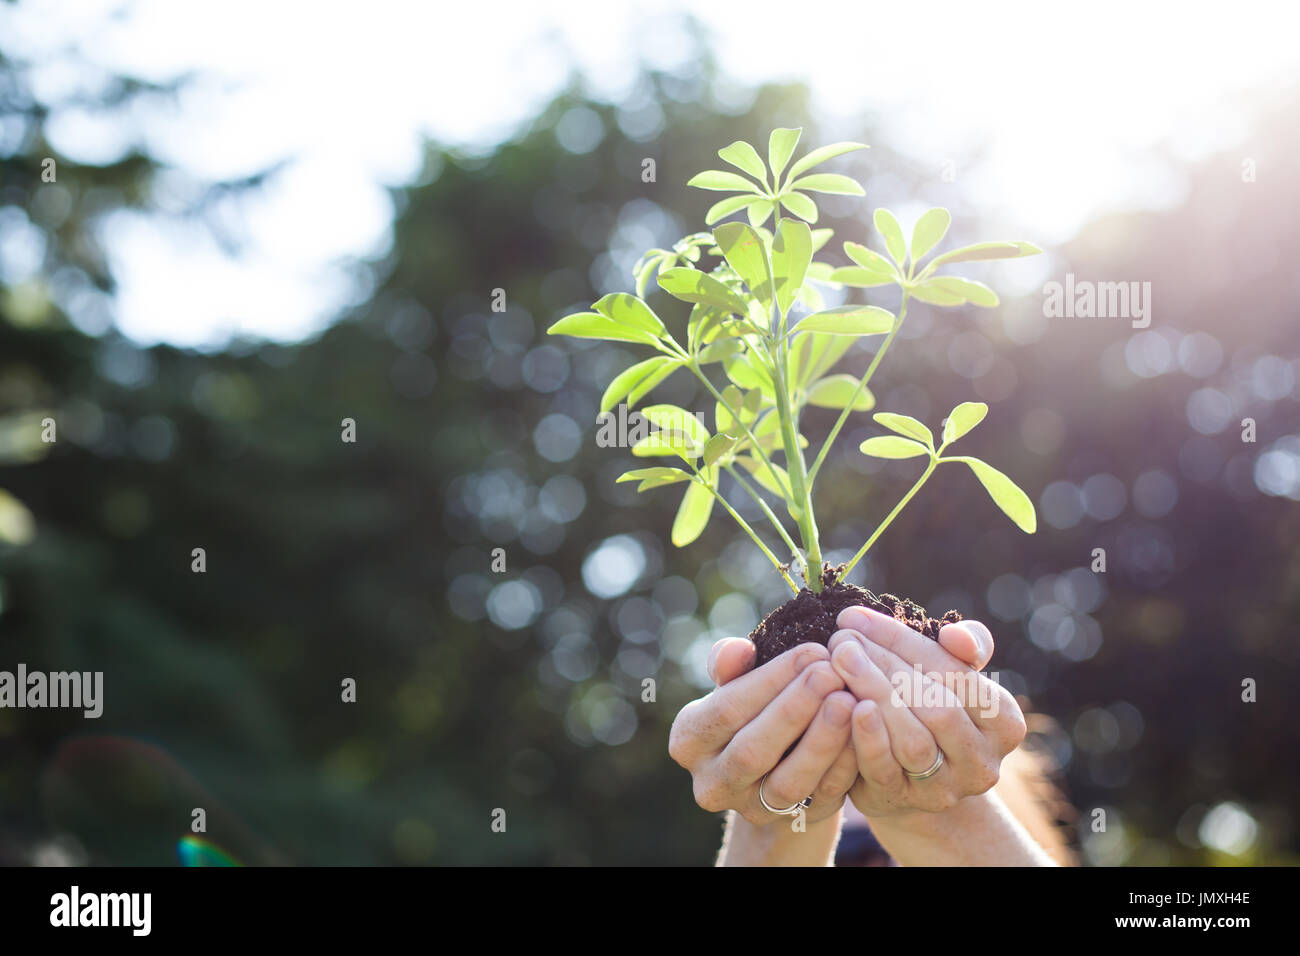 Sunlight catches this young fresh new plant as it is raised up. Stock Photo